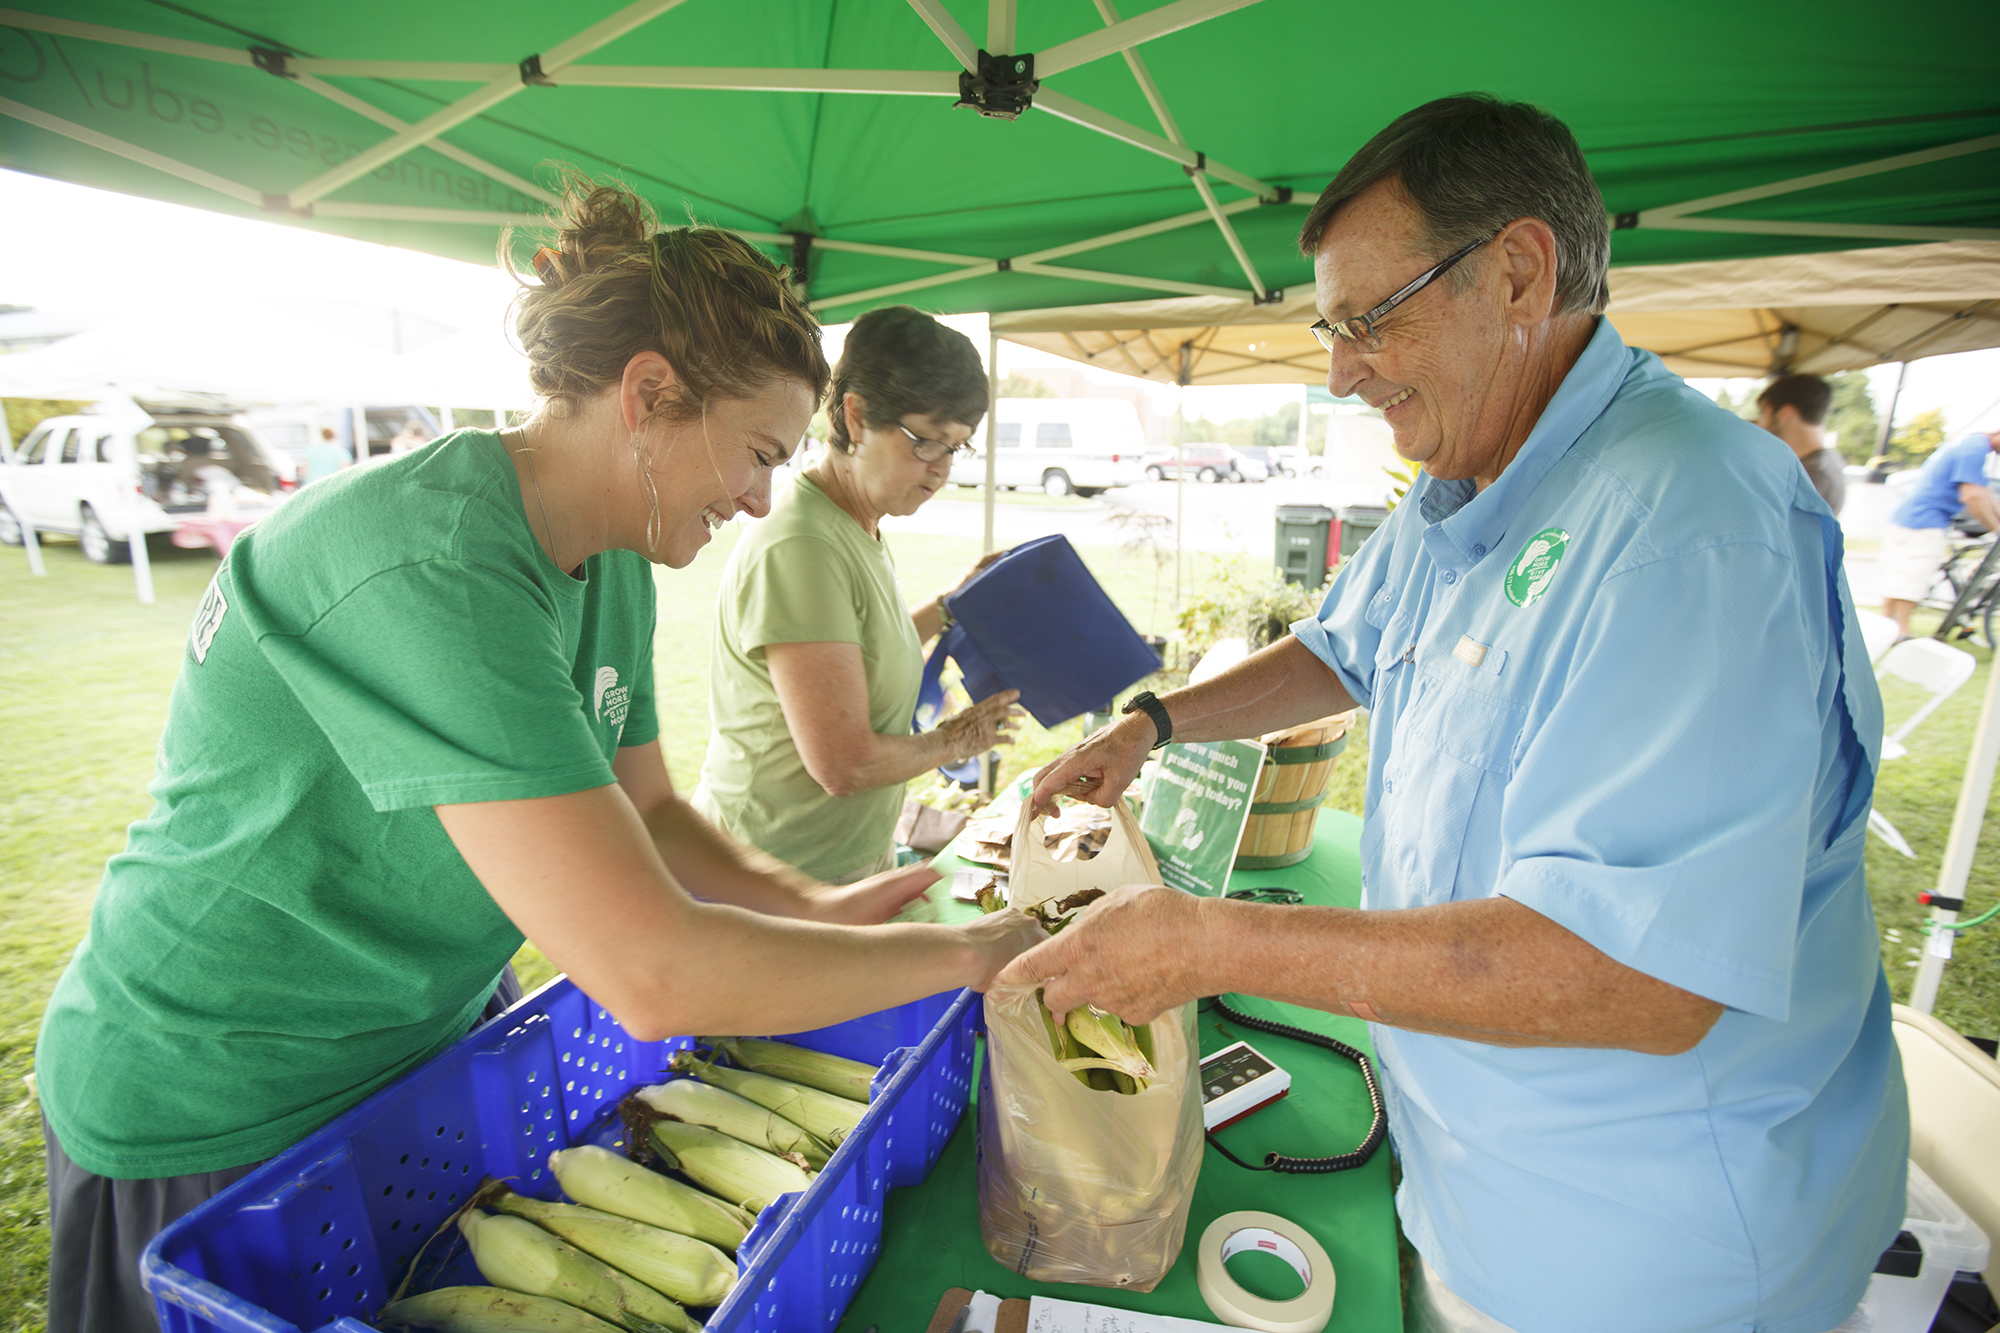 Whether it is a crate of corn or a handful of squash, no amount of fruits and vegetables is too small to fill the void of those who need it most. Jean Hulsey, left, assists Mike Smith, a volunteer of the Society of St. Andrew. Smith transports the produce to East Tennessee shelters and food banks.